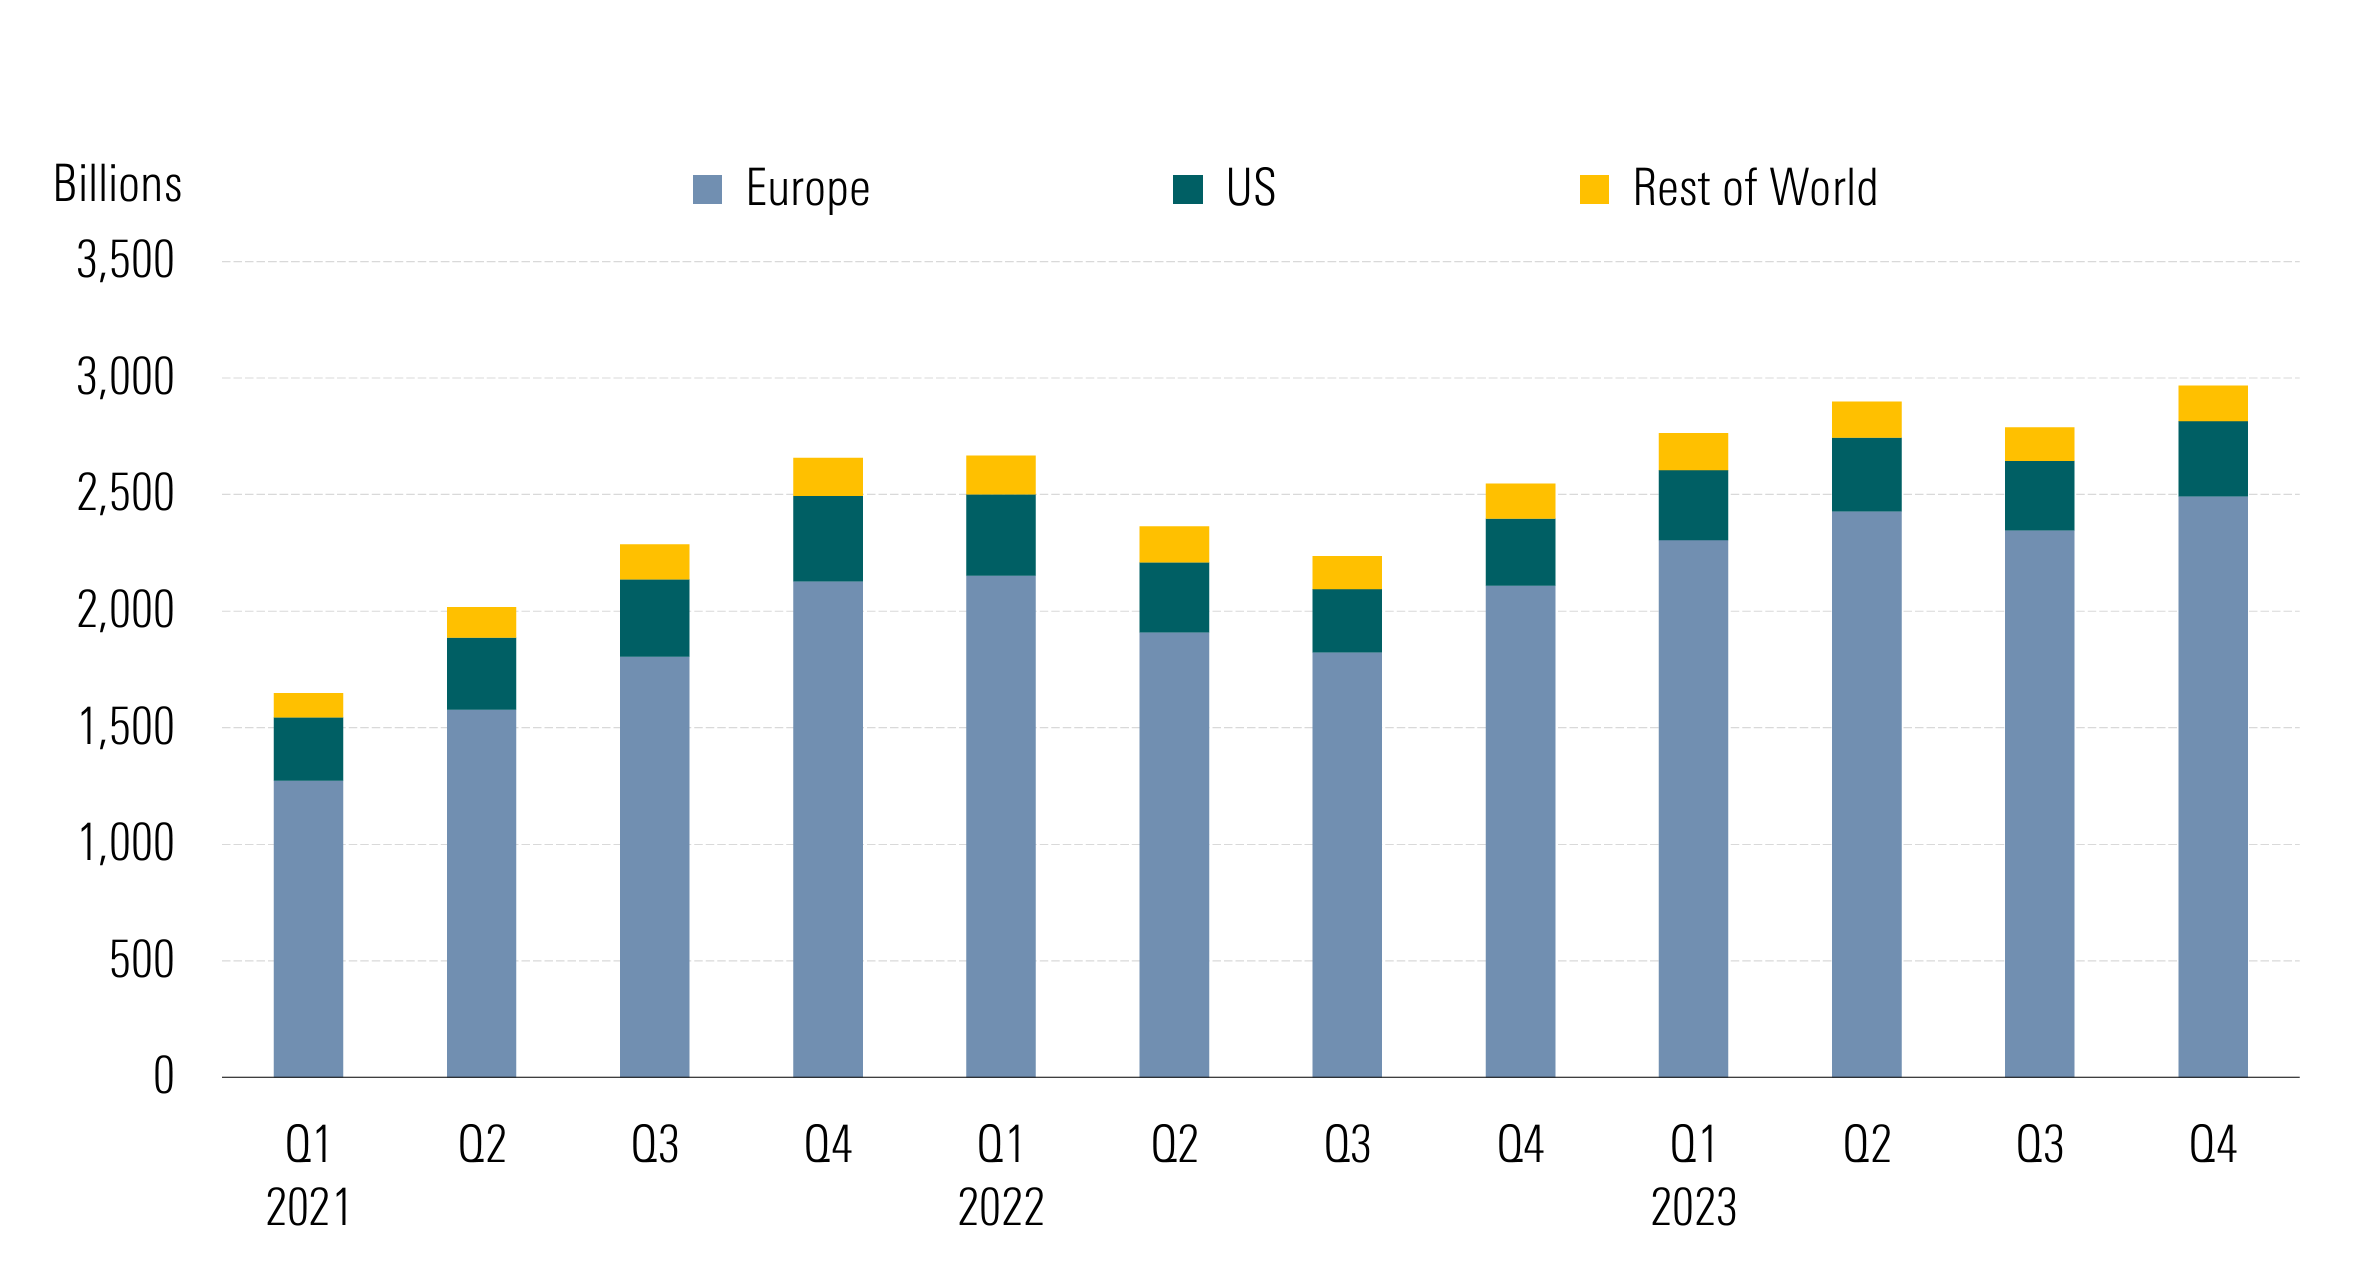 Bar chart showing the growth of sustainable fund assets in Europe, the US, and the rest of the world between Q1 2021 and Q4 2023.